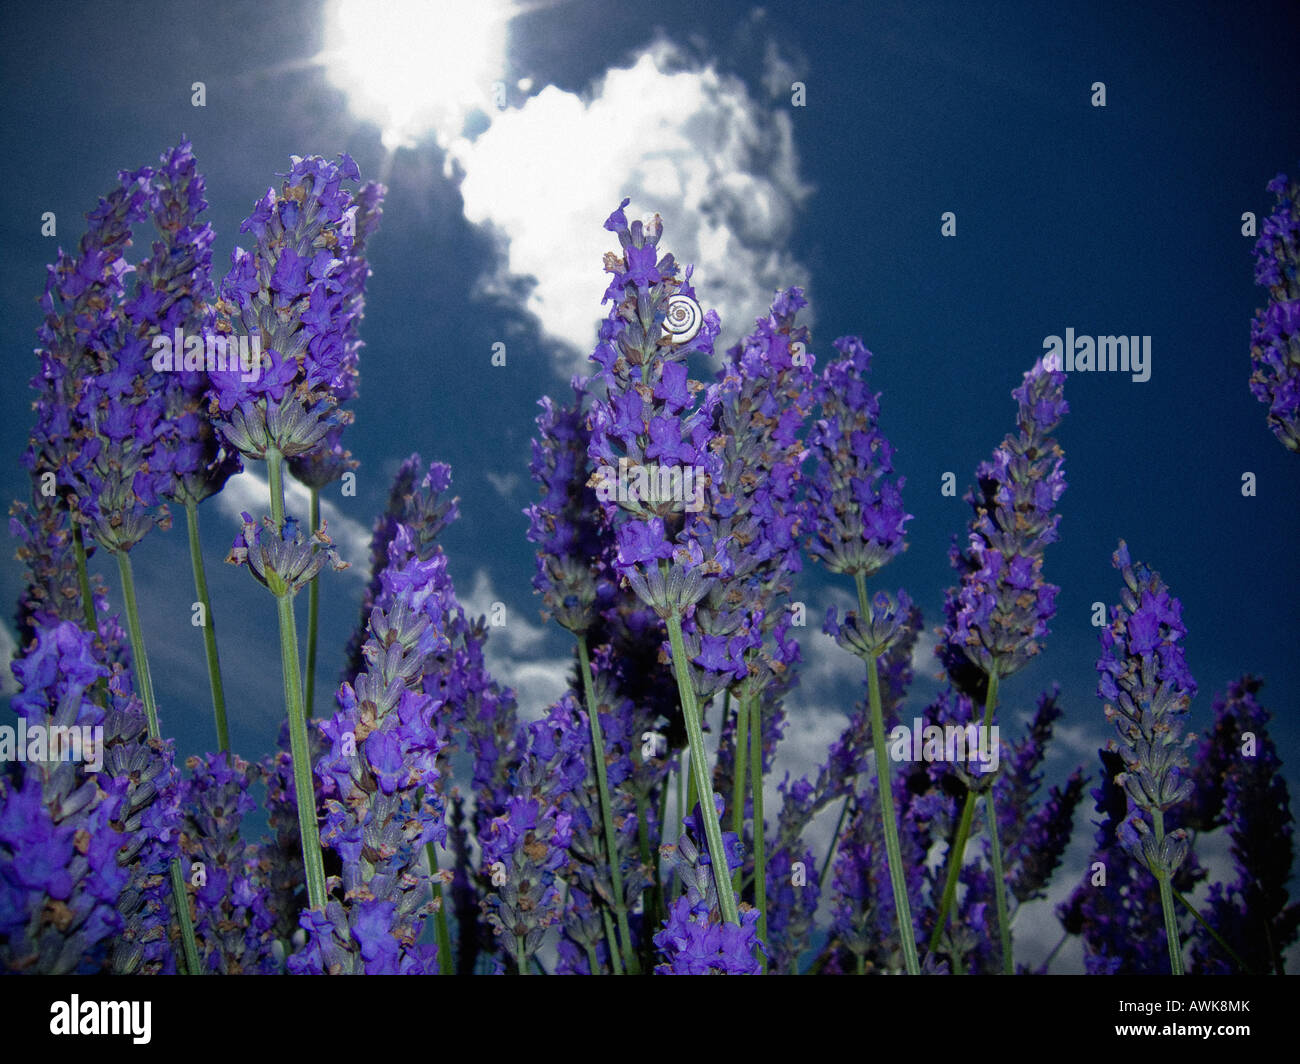 Closeup of lavender flowers growing in a UK garden seen against a blue sky on a sunny day. Stock Photo